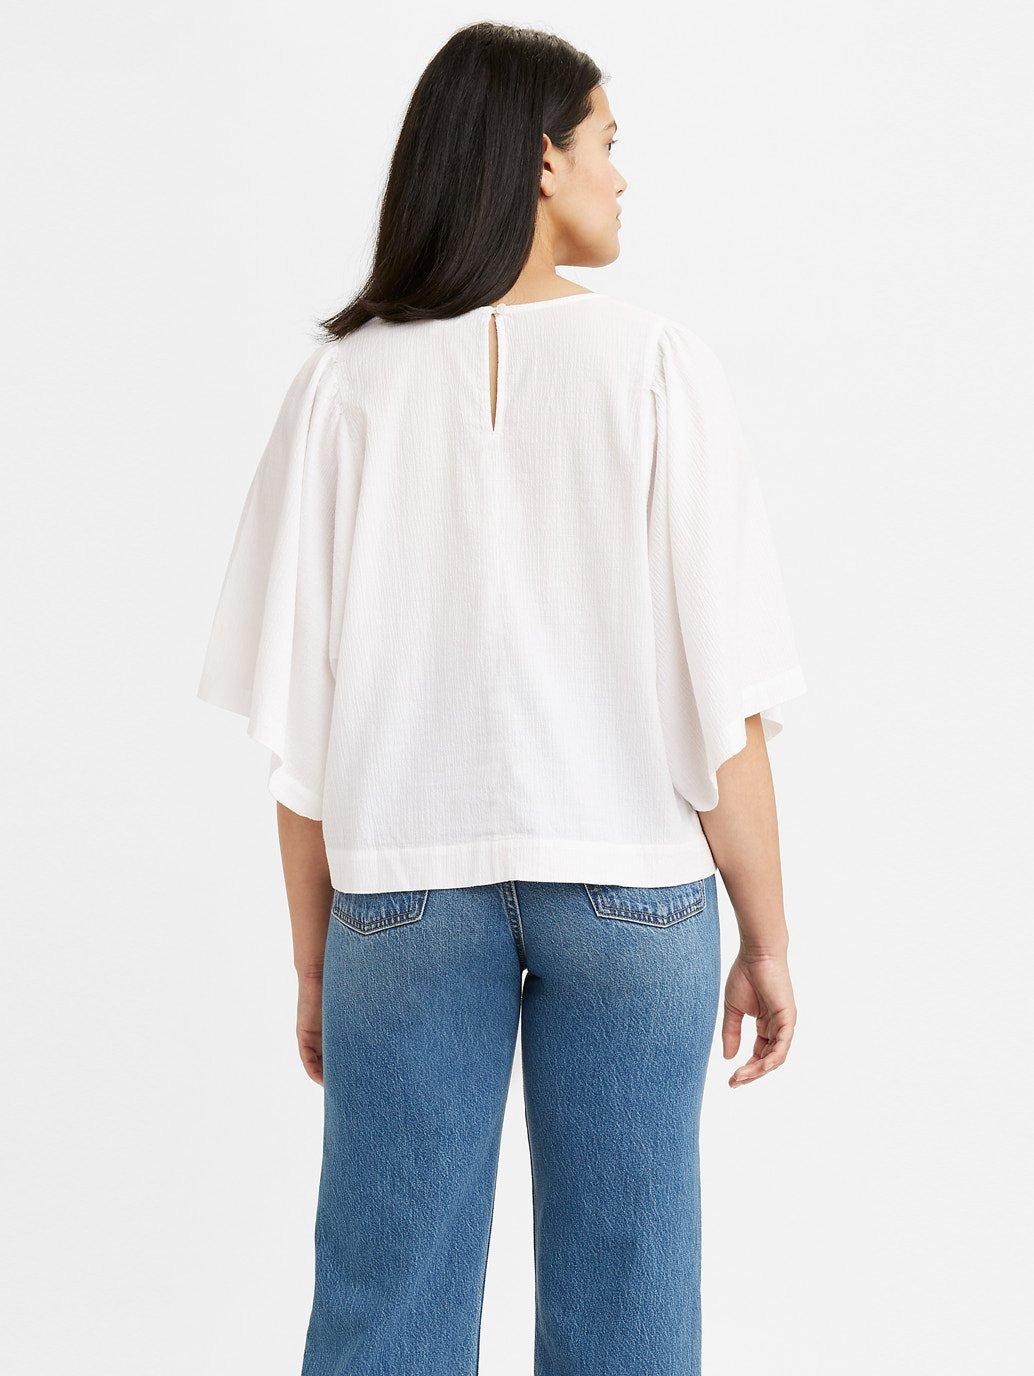 levis malaysia womens lucy wing top 298310001 02 Back